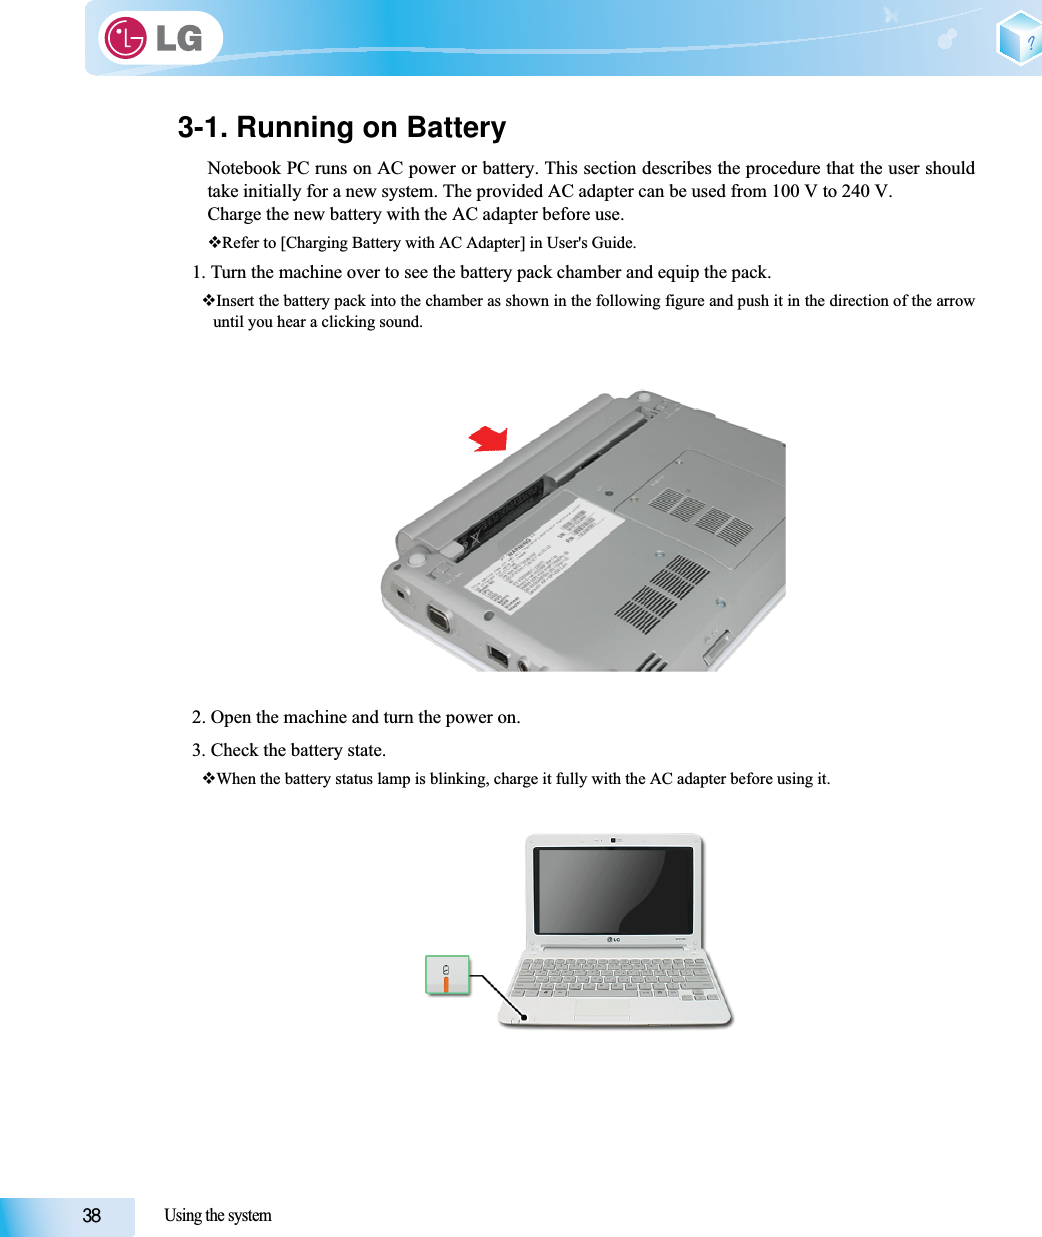 Using the system3-1. Running on BatteryNotebook PC runs on AC power or battery. This section describes the procedure that the user shouldtake initially for a new system. The provided AC adapter can be used from 100 V to 240 V.Charge the new battery with the AC adapter before use.Refer to [Charging Battery with AC Adapter] in User&apos;s Guide.1. Turn the machine over to see the battery pack chamber and equip the pack.Insert the battery pack into the chamber as shown in the following figure and push it in the direction of the arrowuntil you hear a clicking sound.2. Open the machine and turn the power on.3. Check the battery state.When the battery status lamp is blinking, charge it fully with the AC adapter before using it.